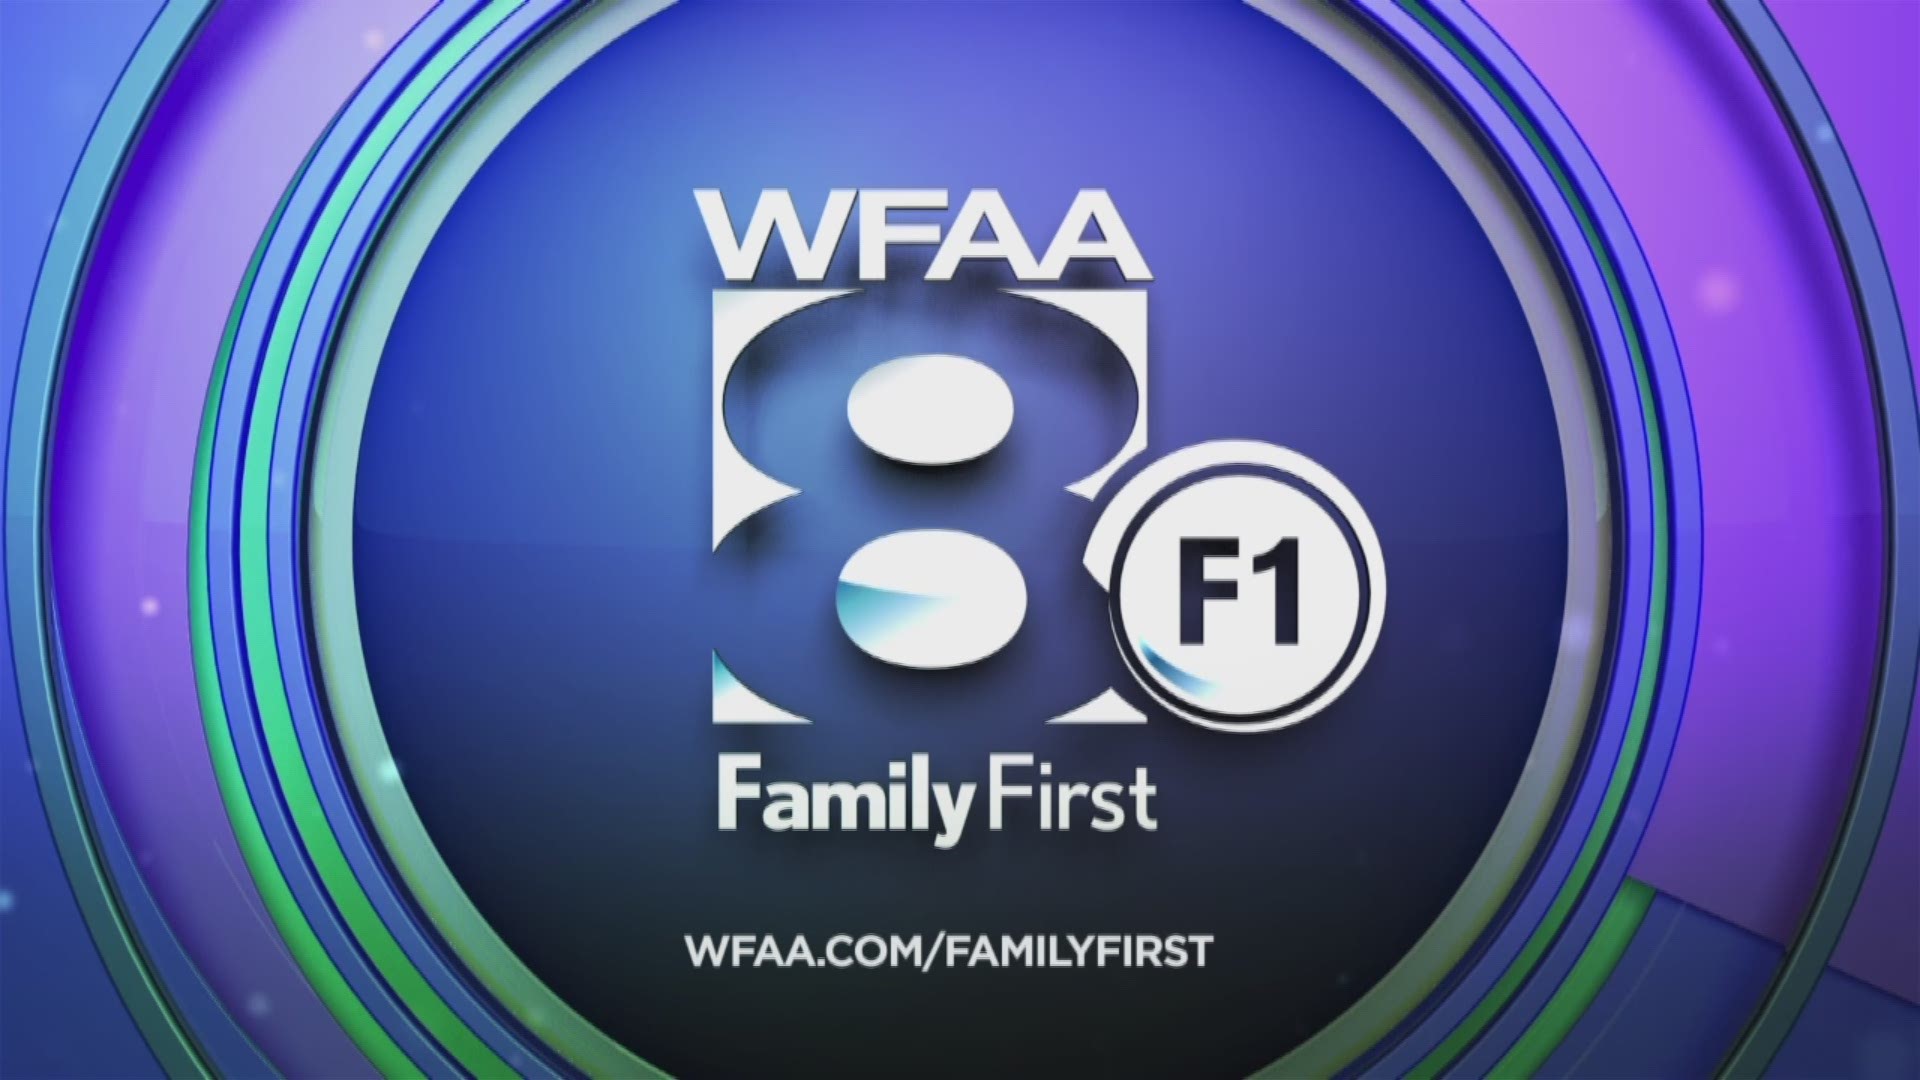 WFAA Meteorologist Greg Fields talks about how they deal with his daughter's asthma.